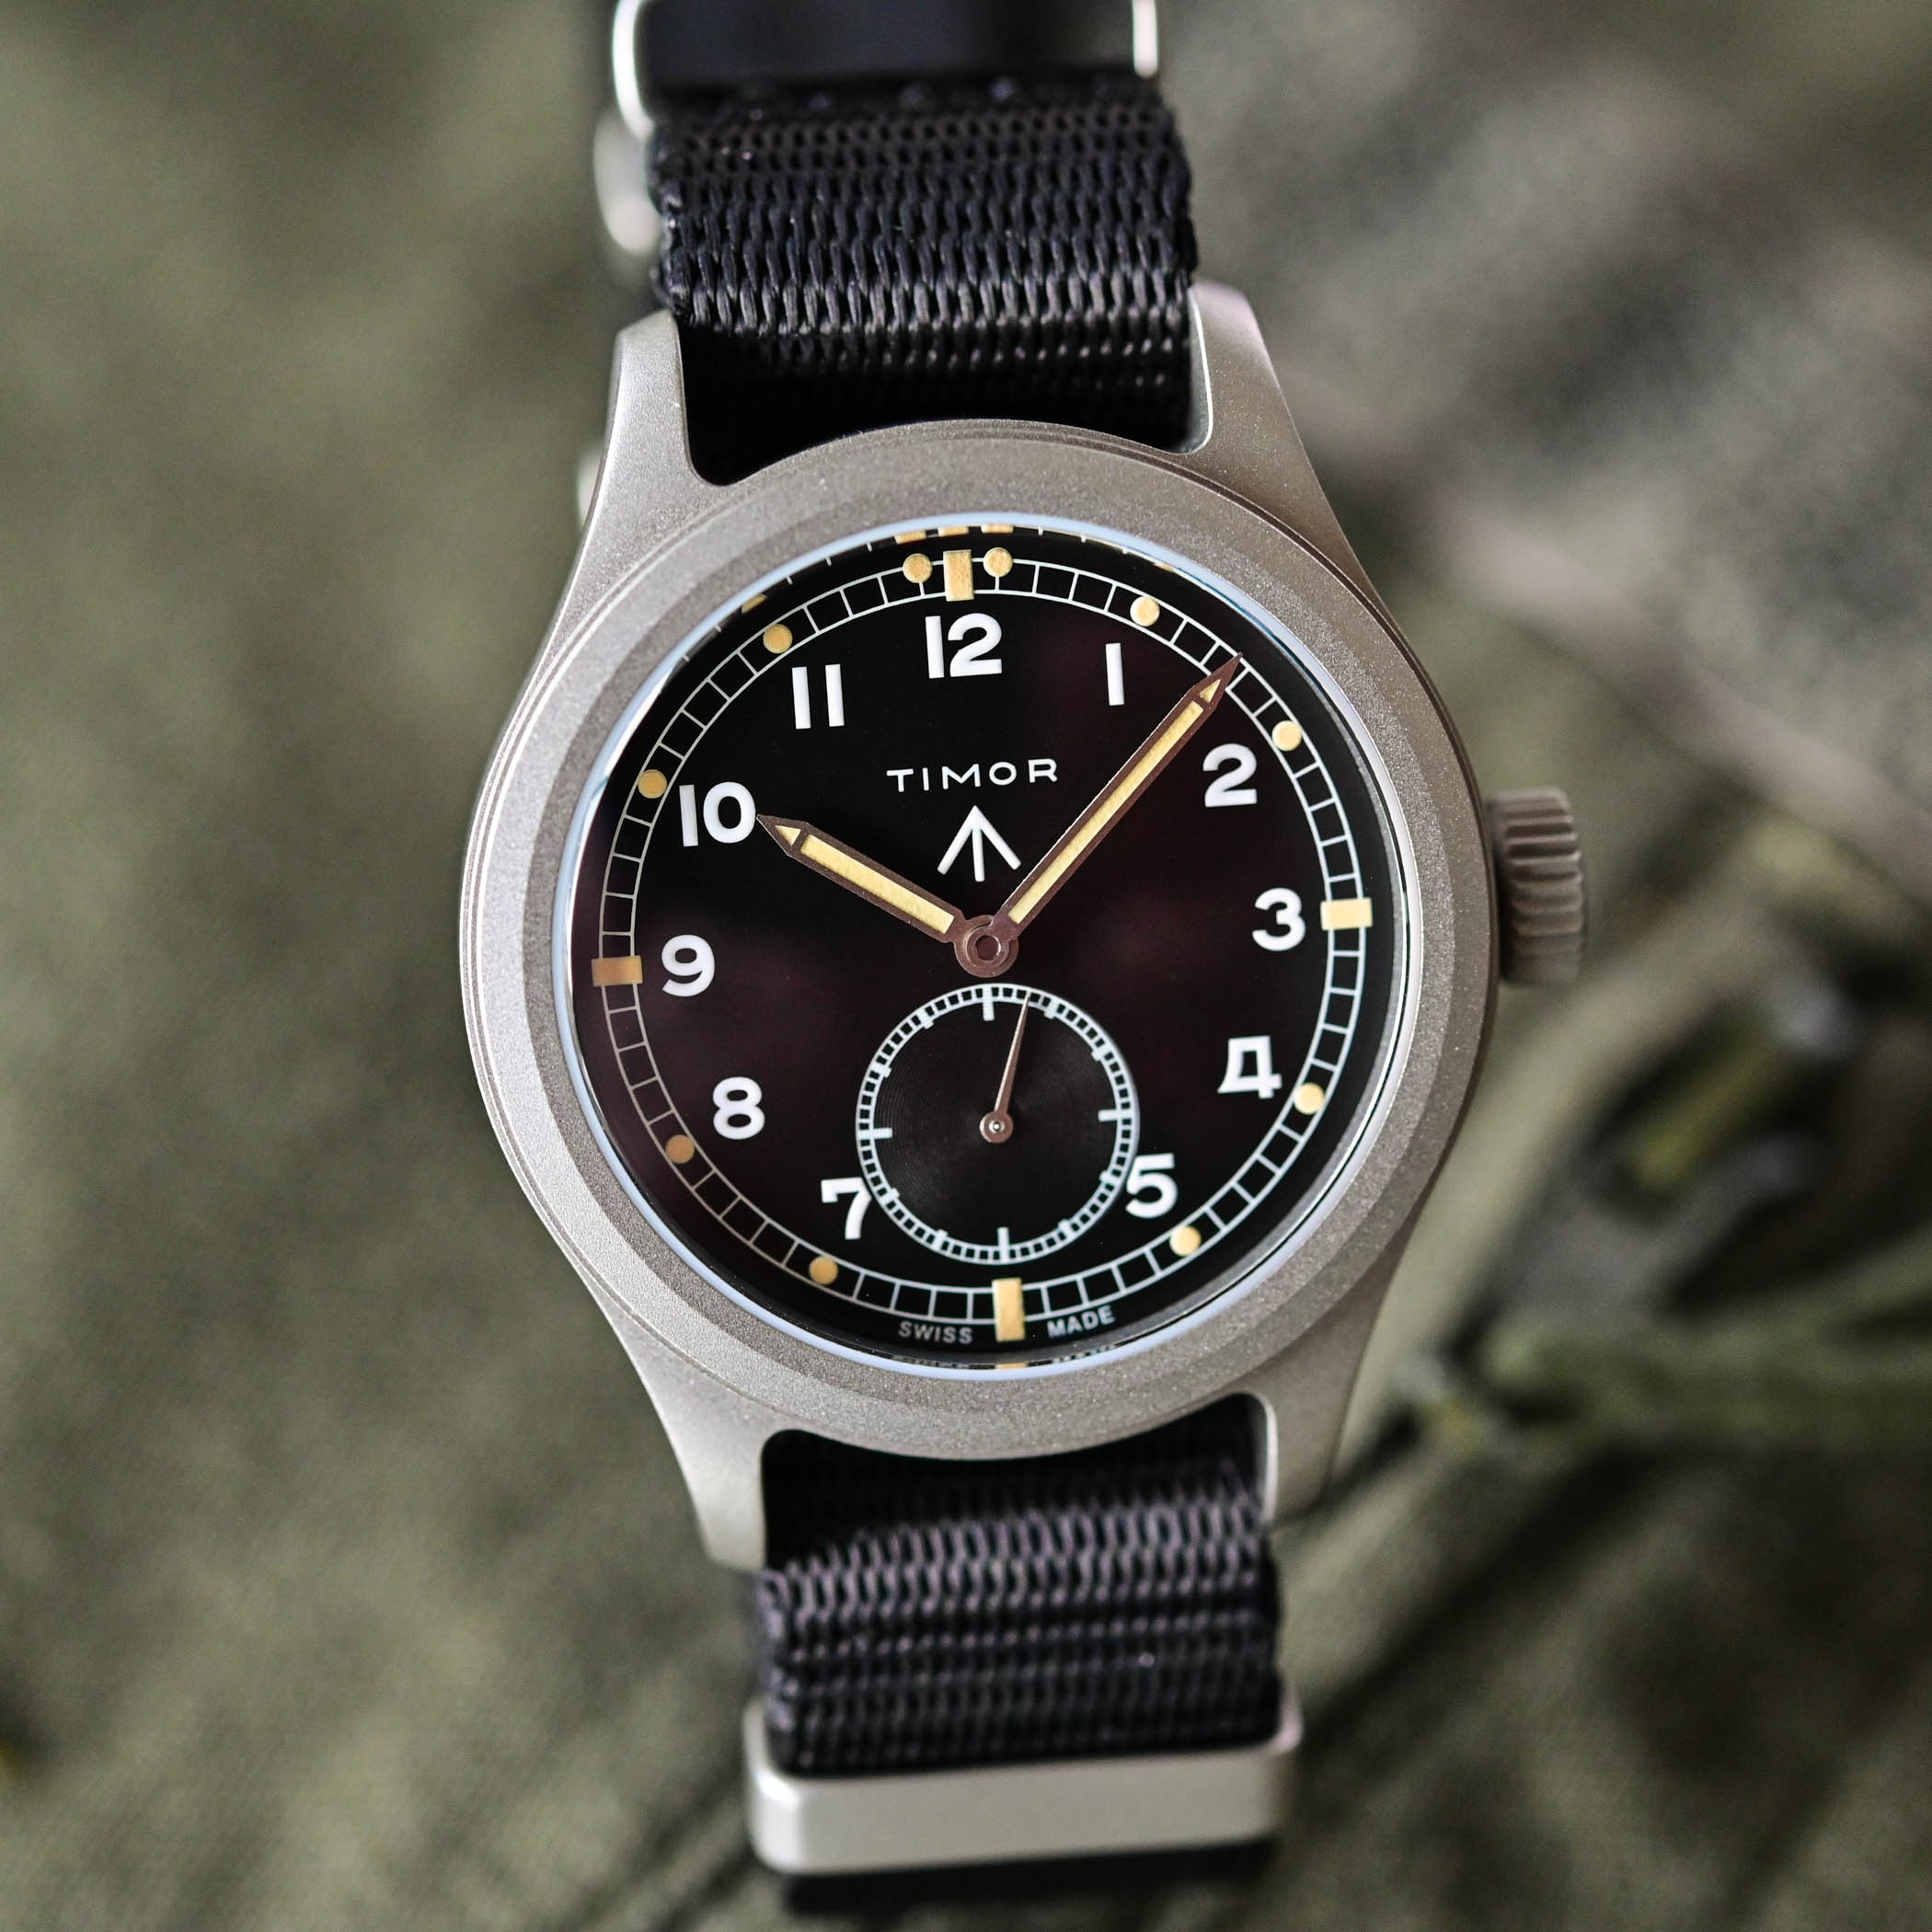 battle of accessible British military-inspired watches - comparative review Hamilton Khaki Pilot Pioneer Mechanical versus Timor Heritage Field - 9